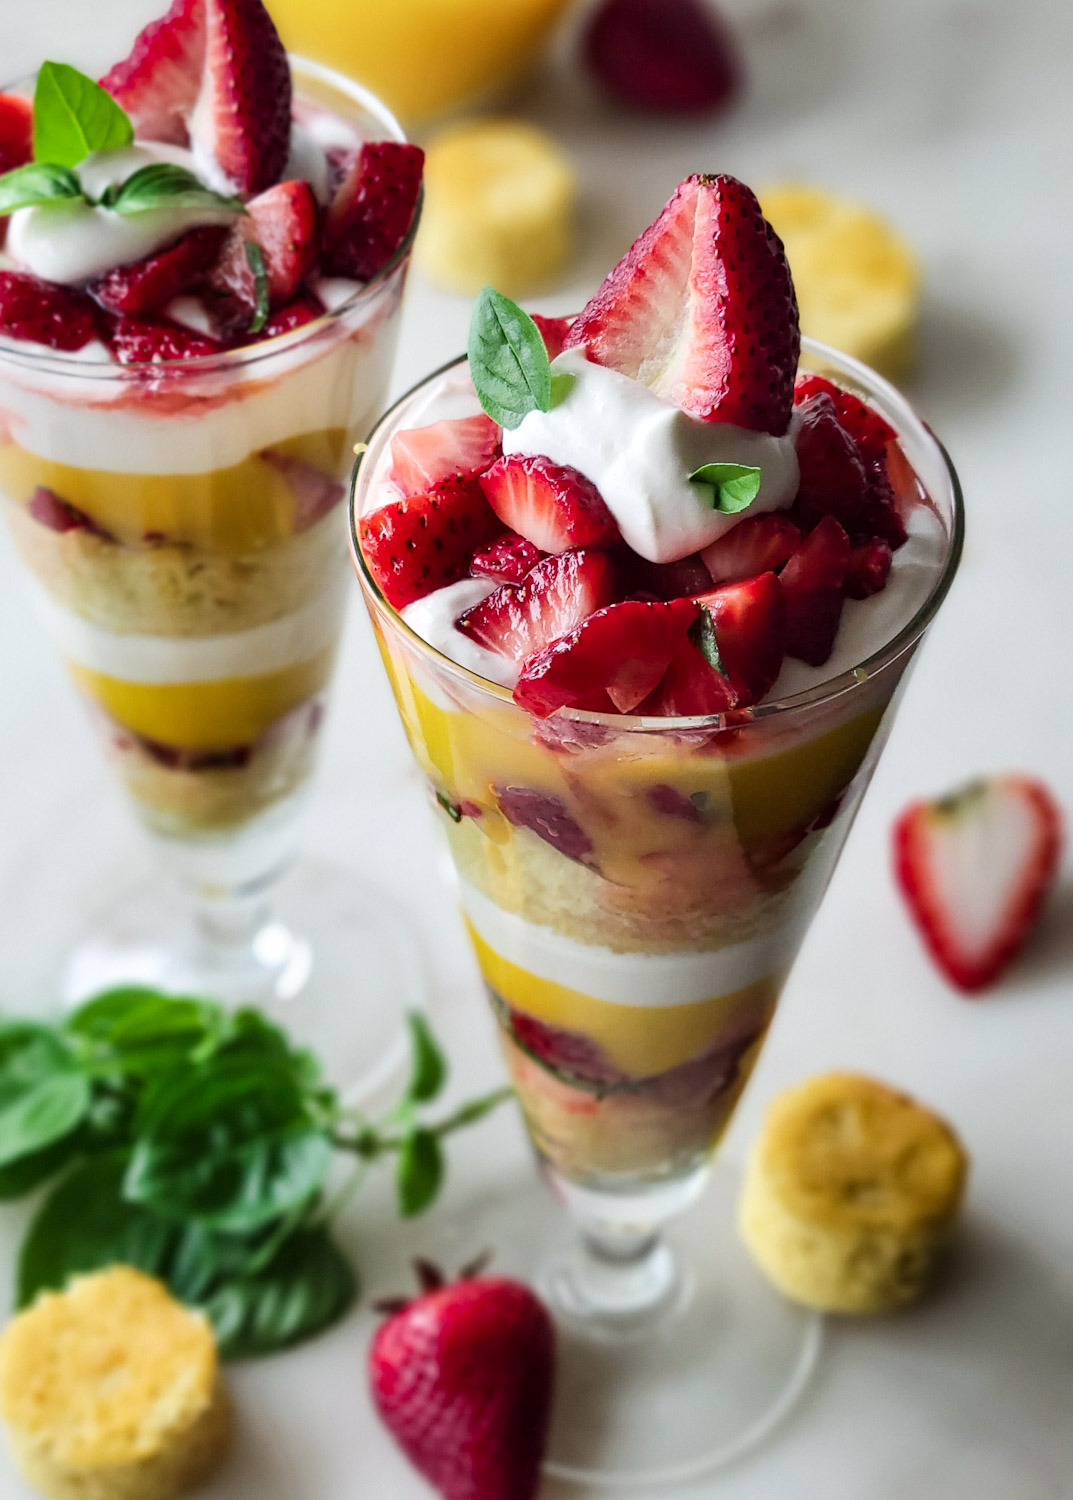 Looking down into two perfectly made Basil Strawberry Shortcake Parfaits in tall glasses.